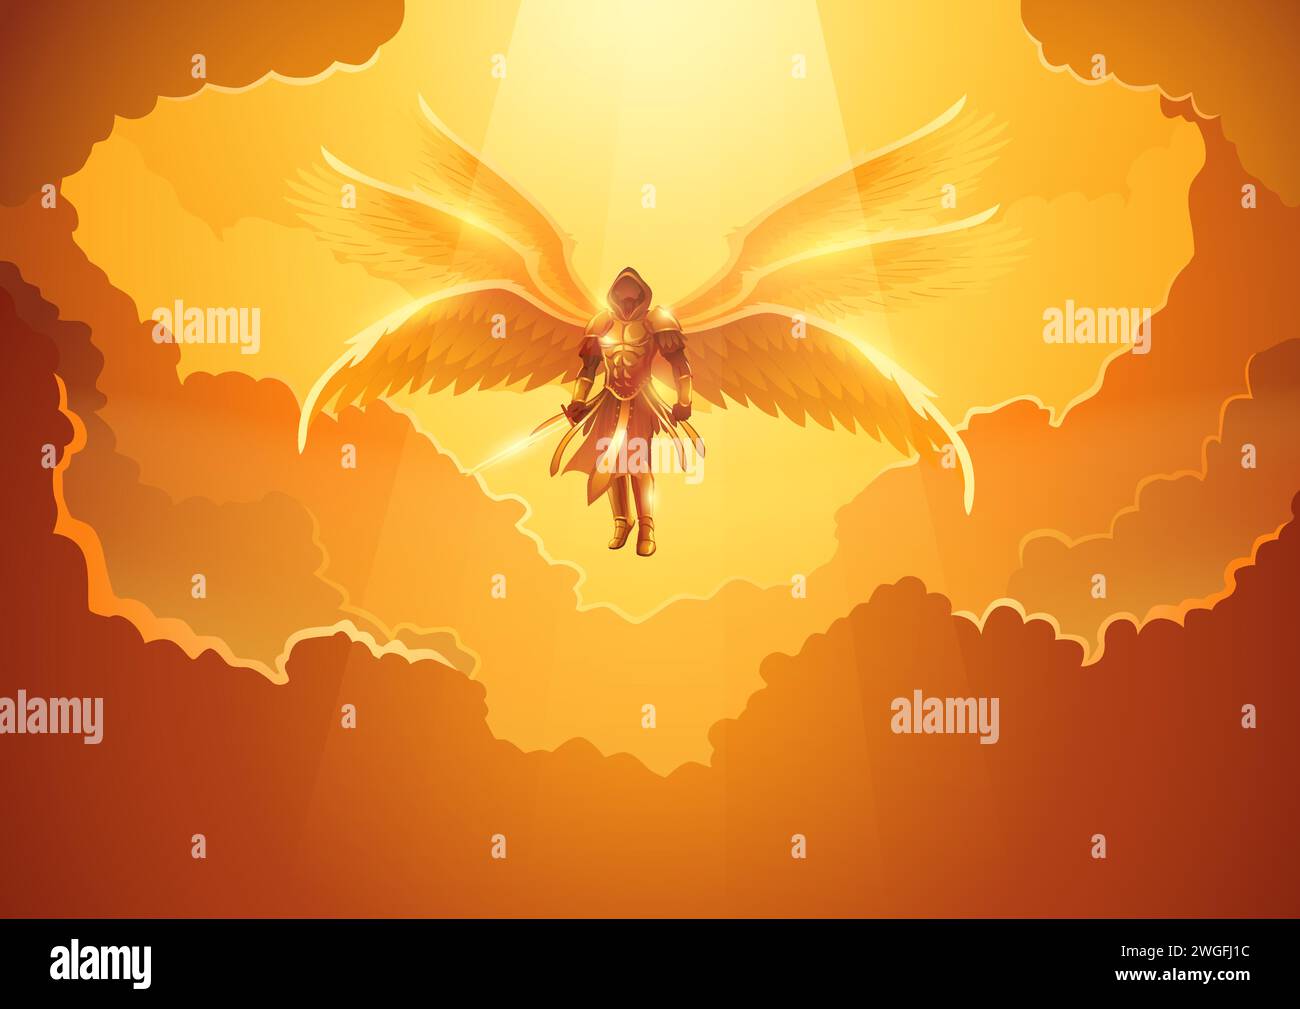 Fantasy art illustration of the Archangel with six wings holding a sword in the open sky Stock Vector